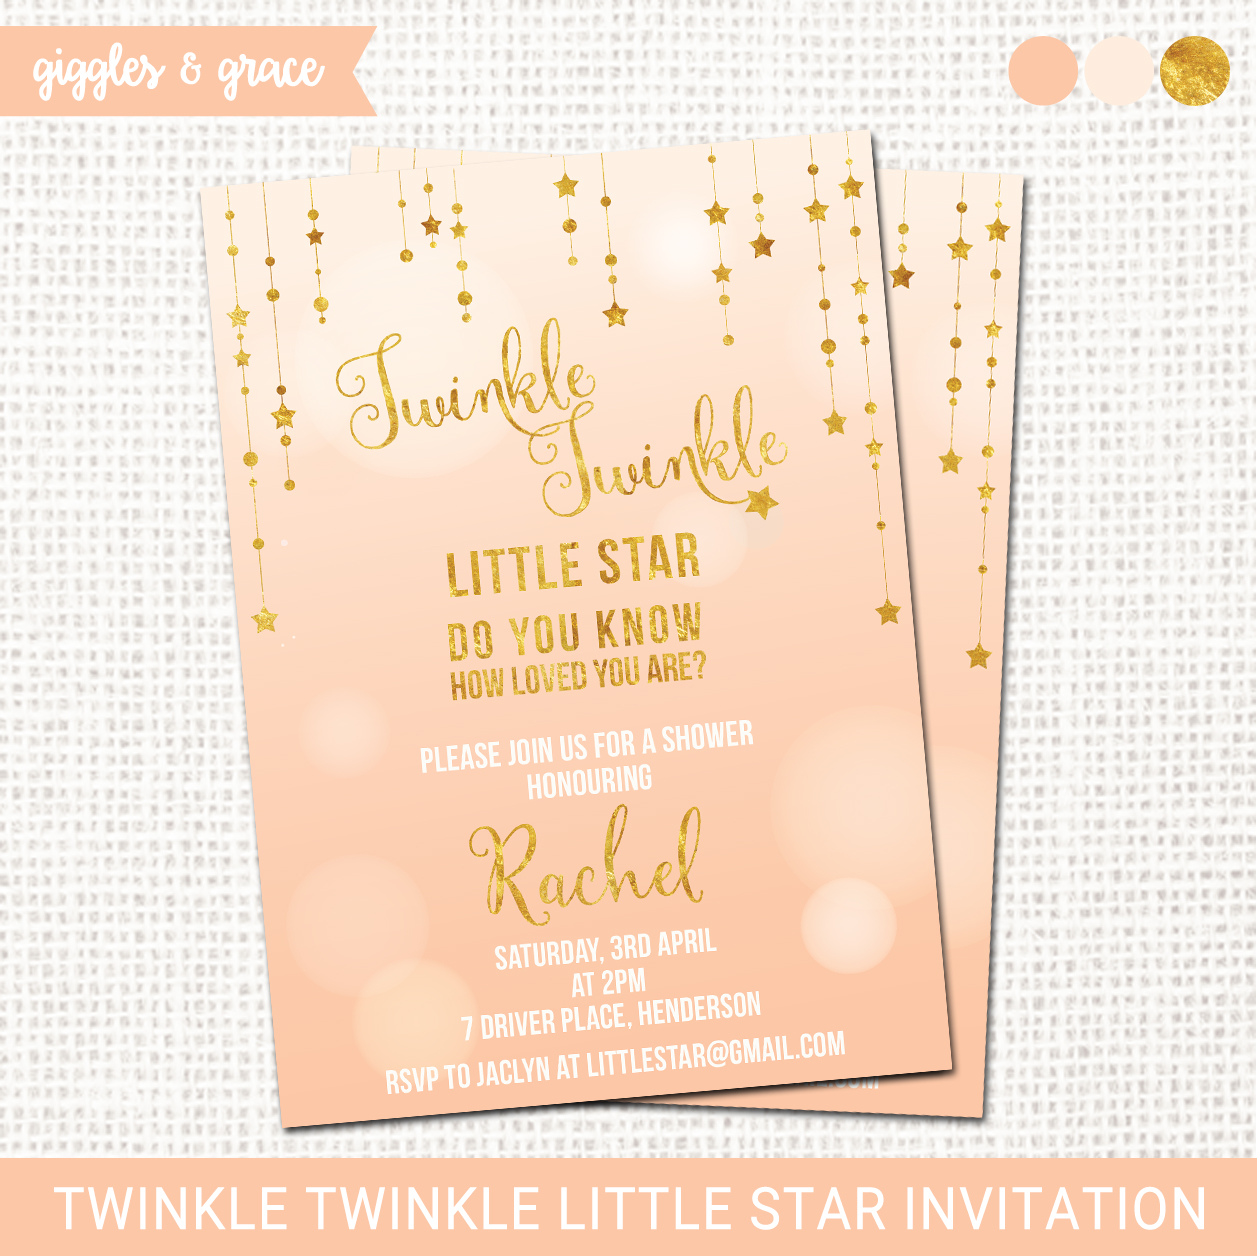 Twinkle Twinkle little star invitation - Giggles and Grace Designs